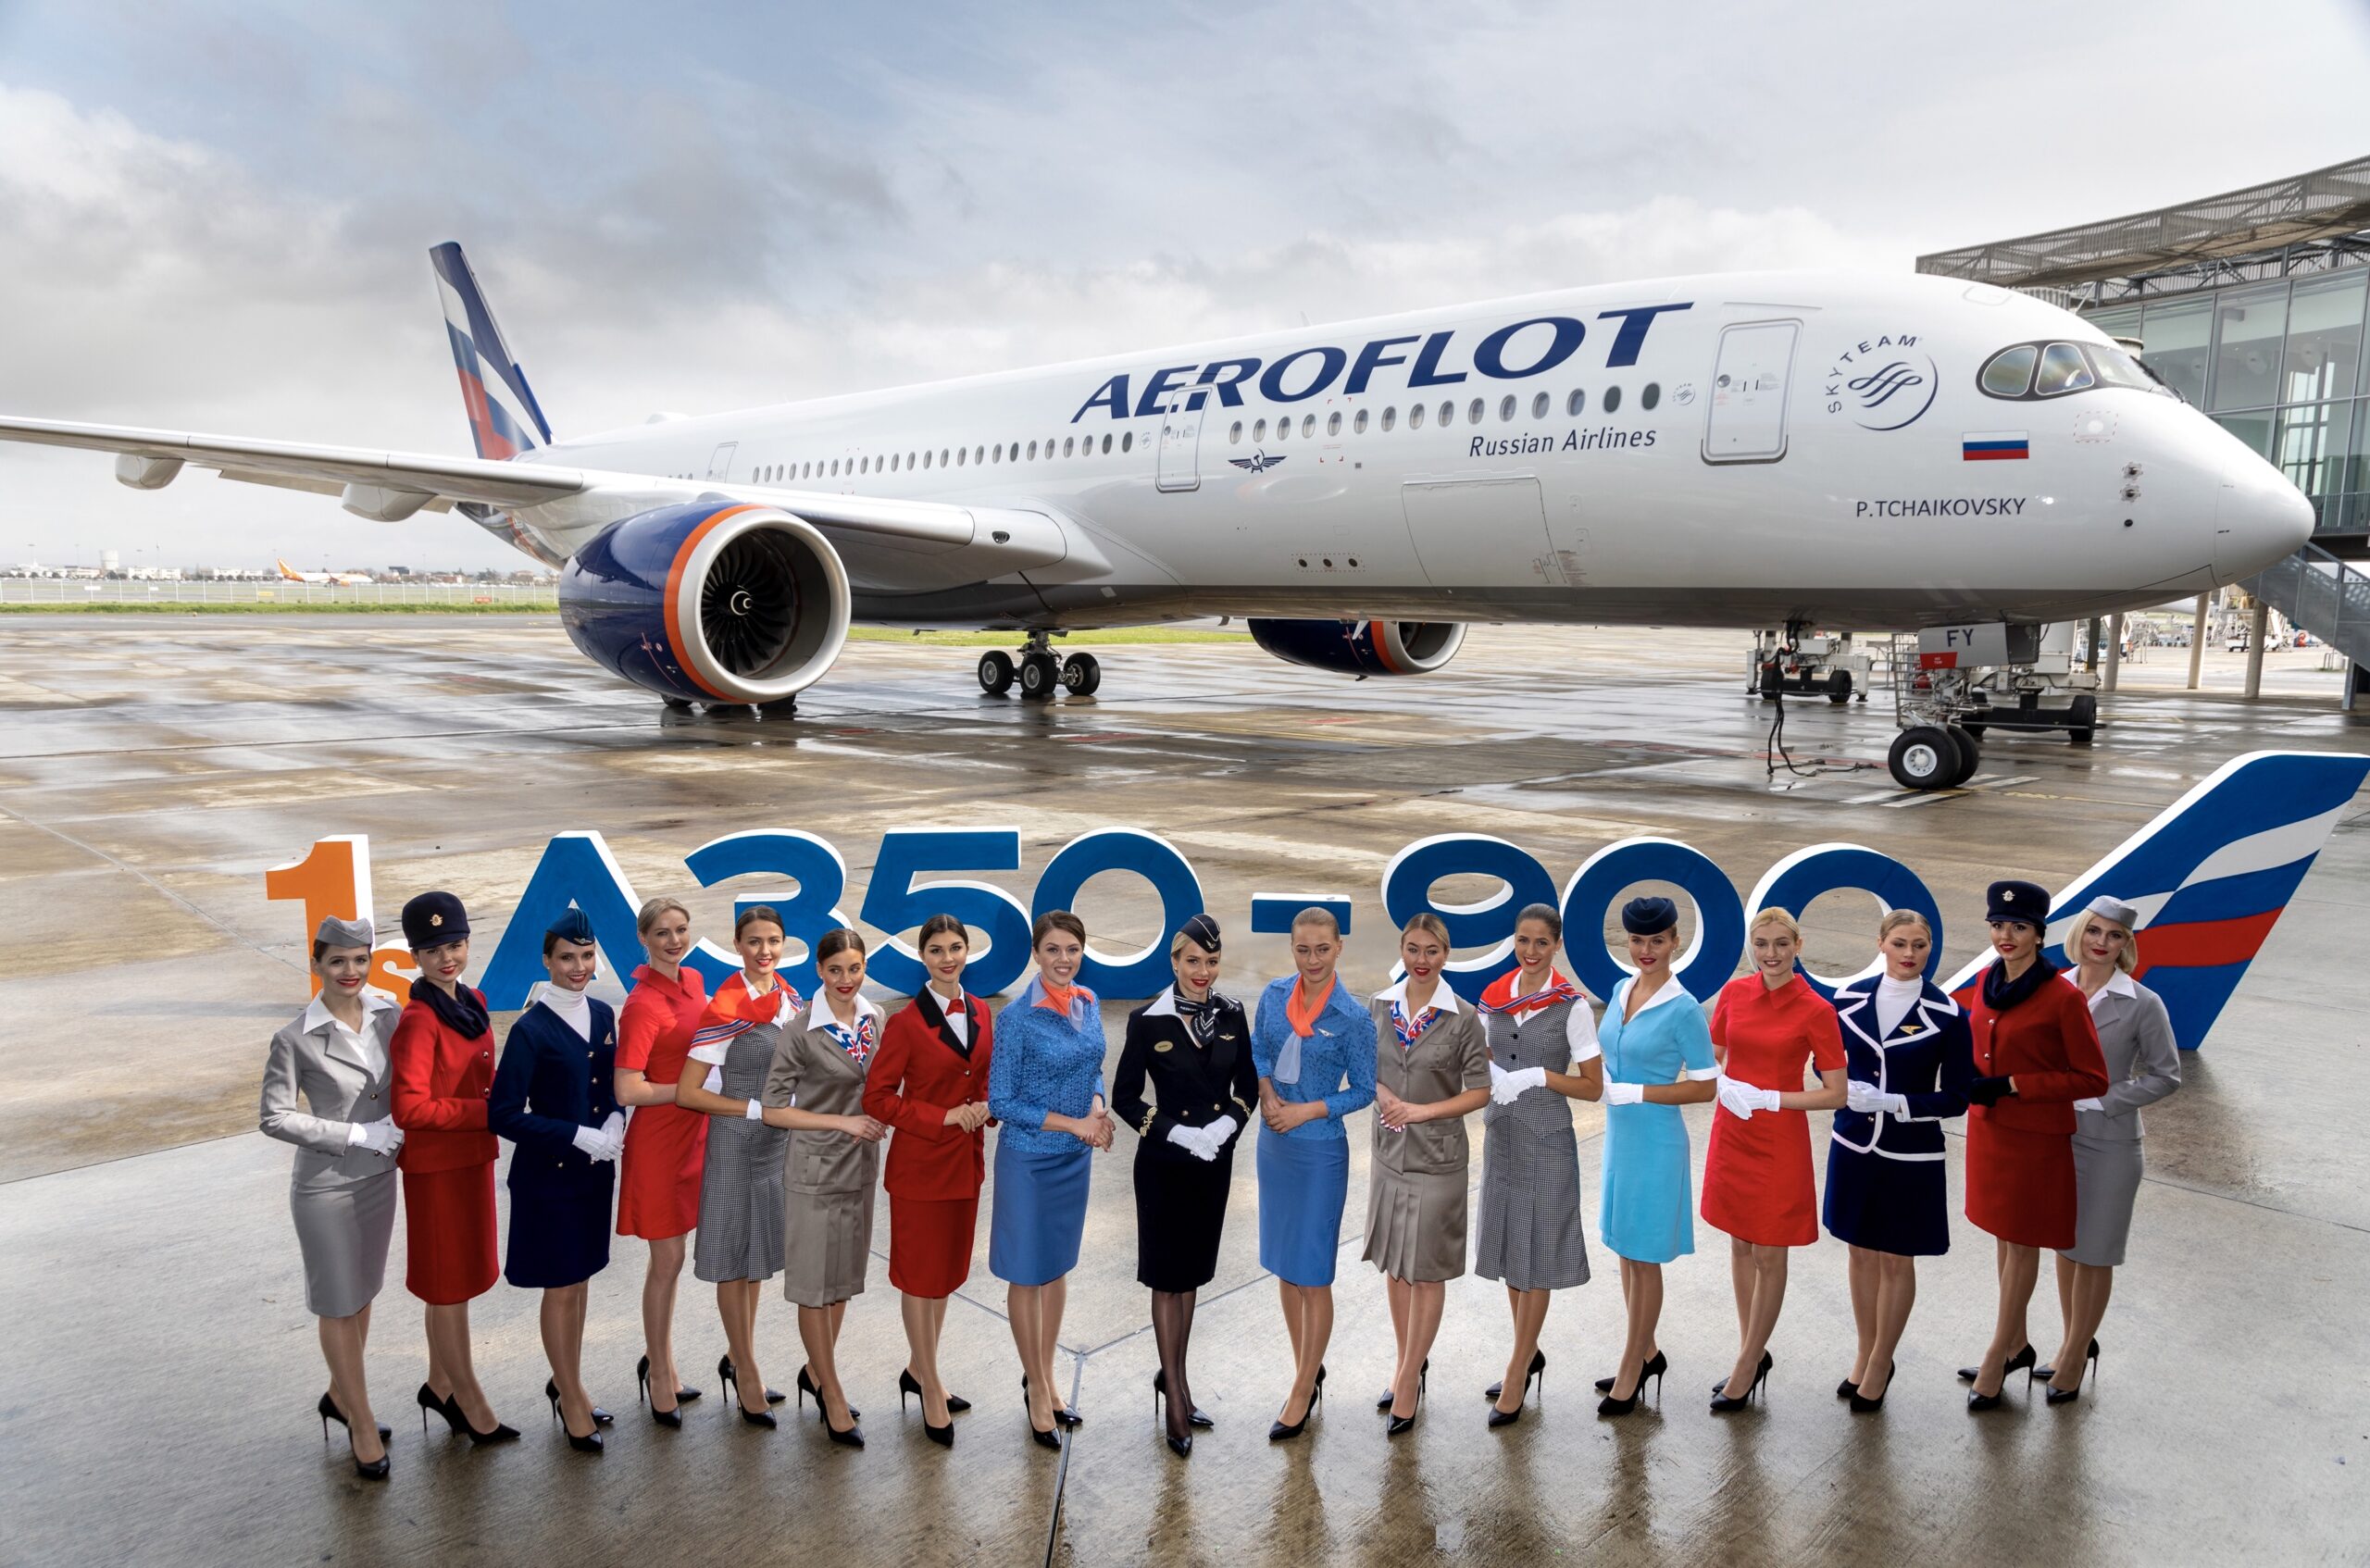 Aeroflot Russian Airlines First A350 Delivered - Samchui.com